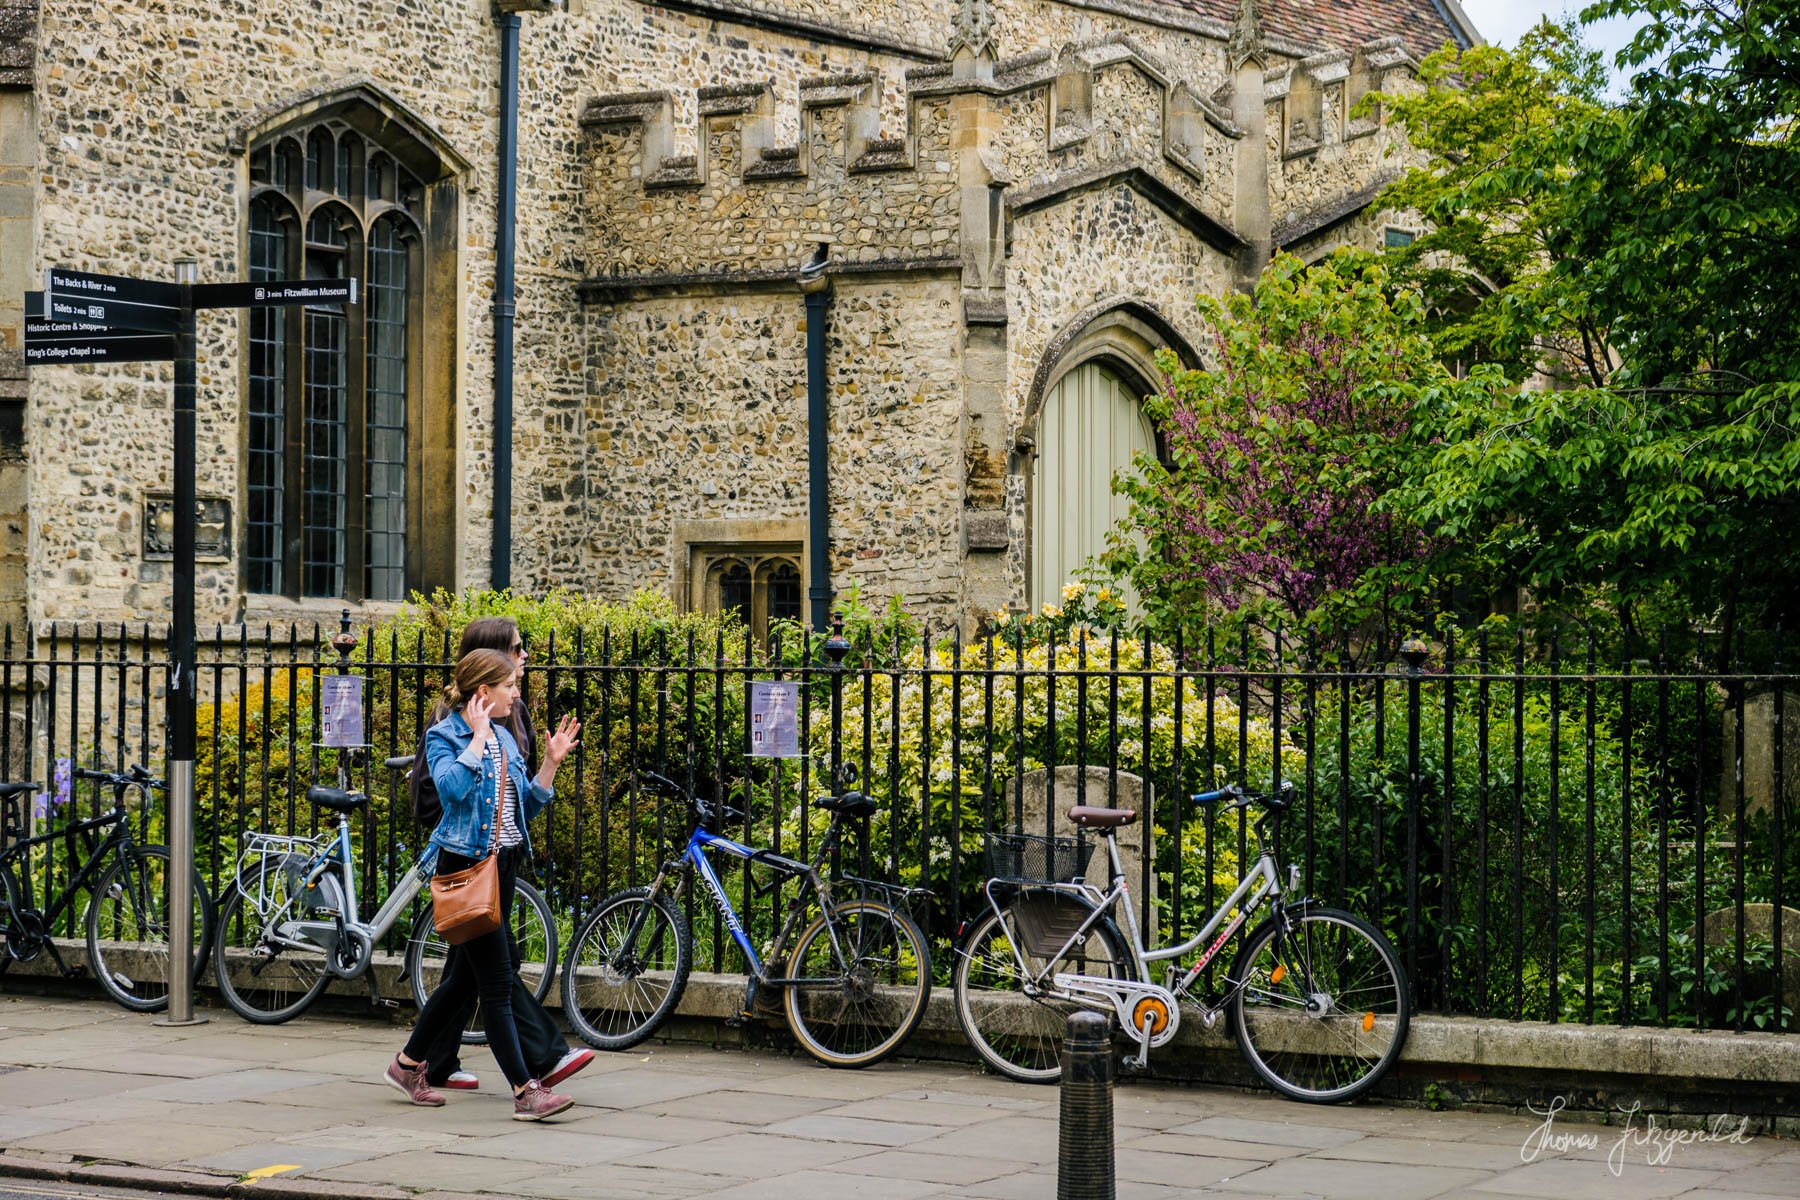 People walking by an old Church in Cambridge